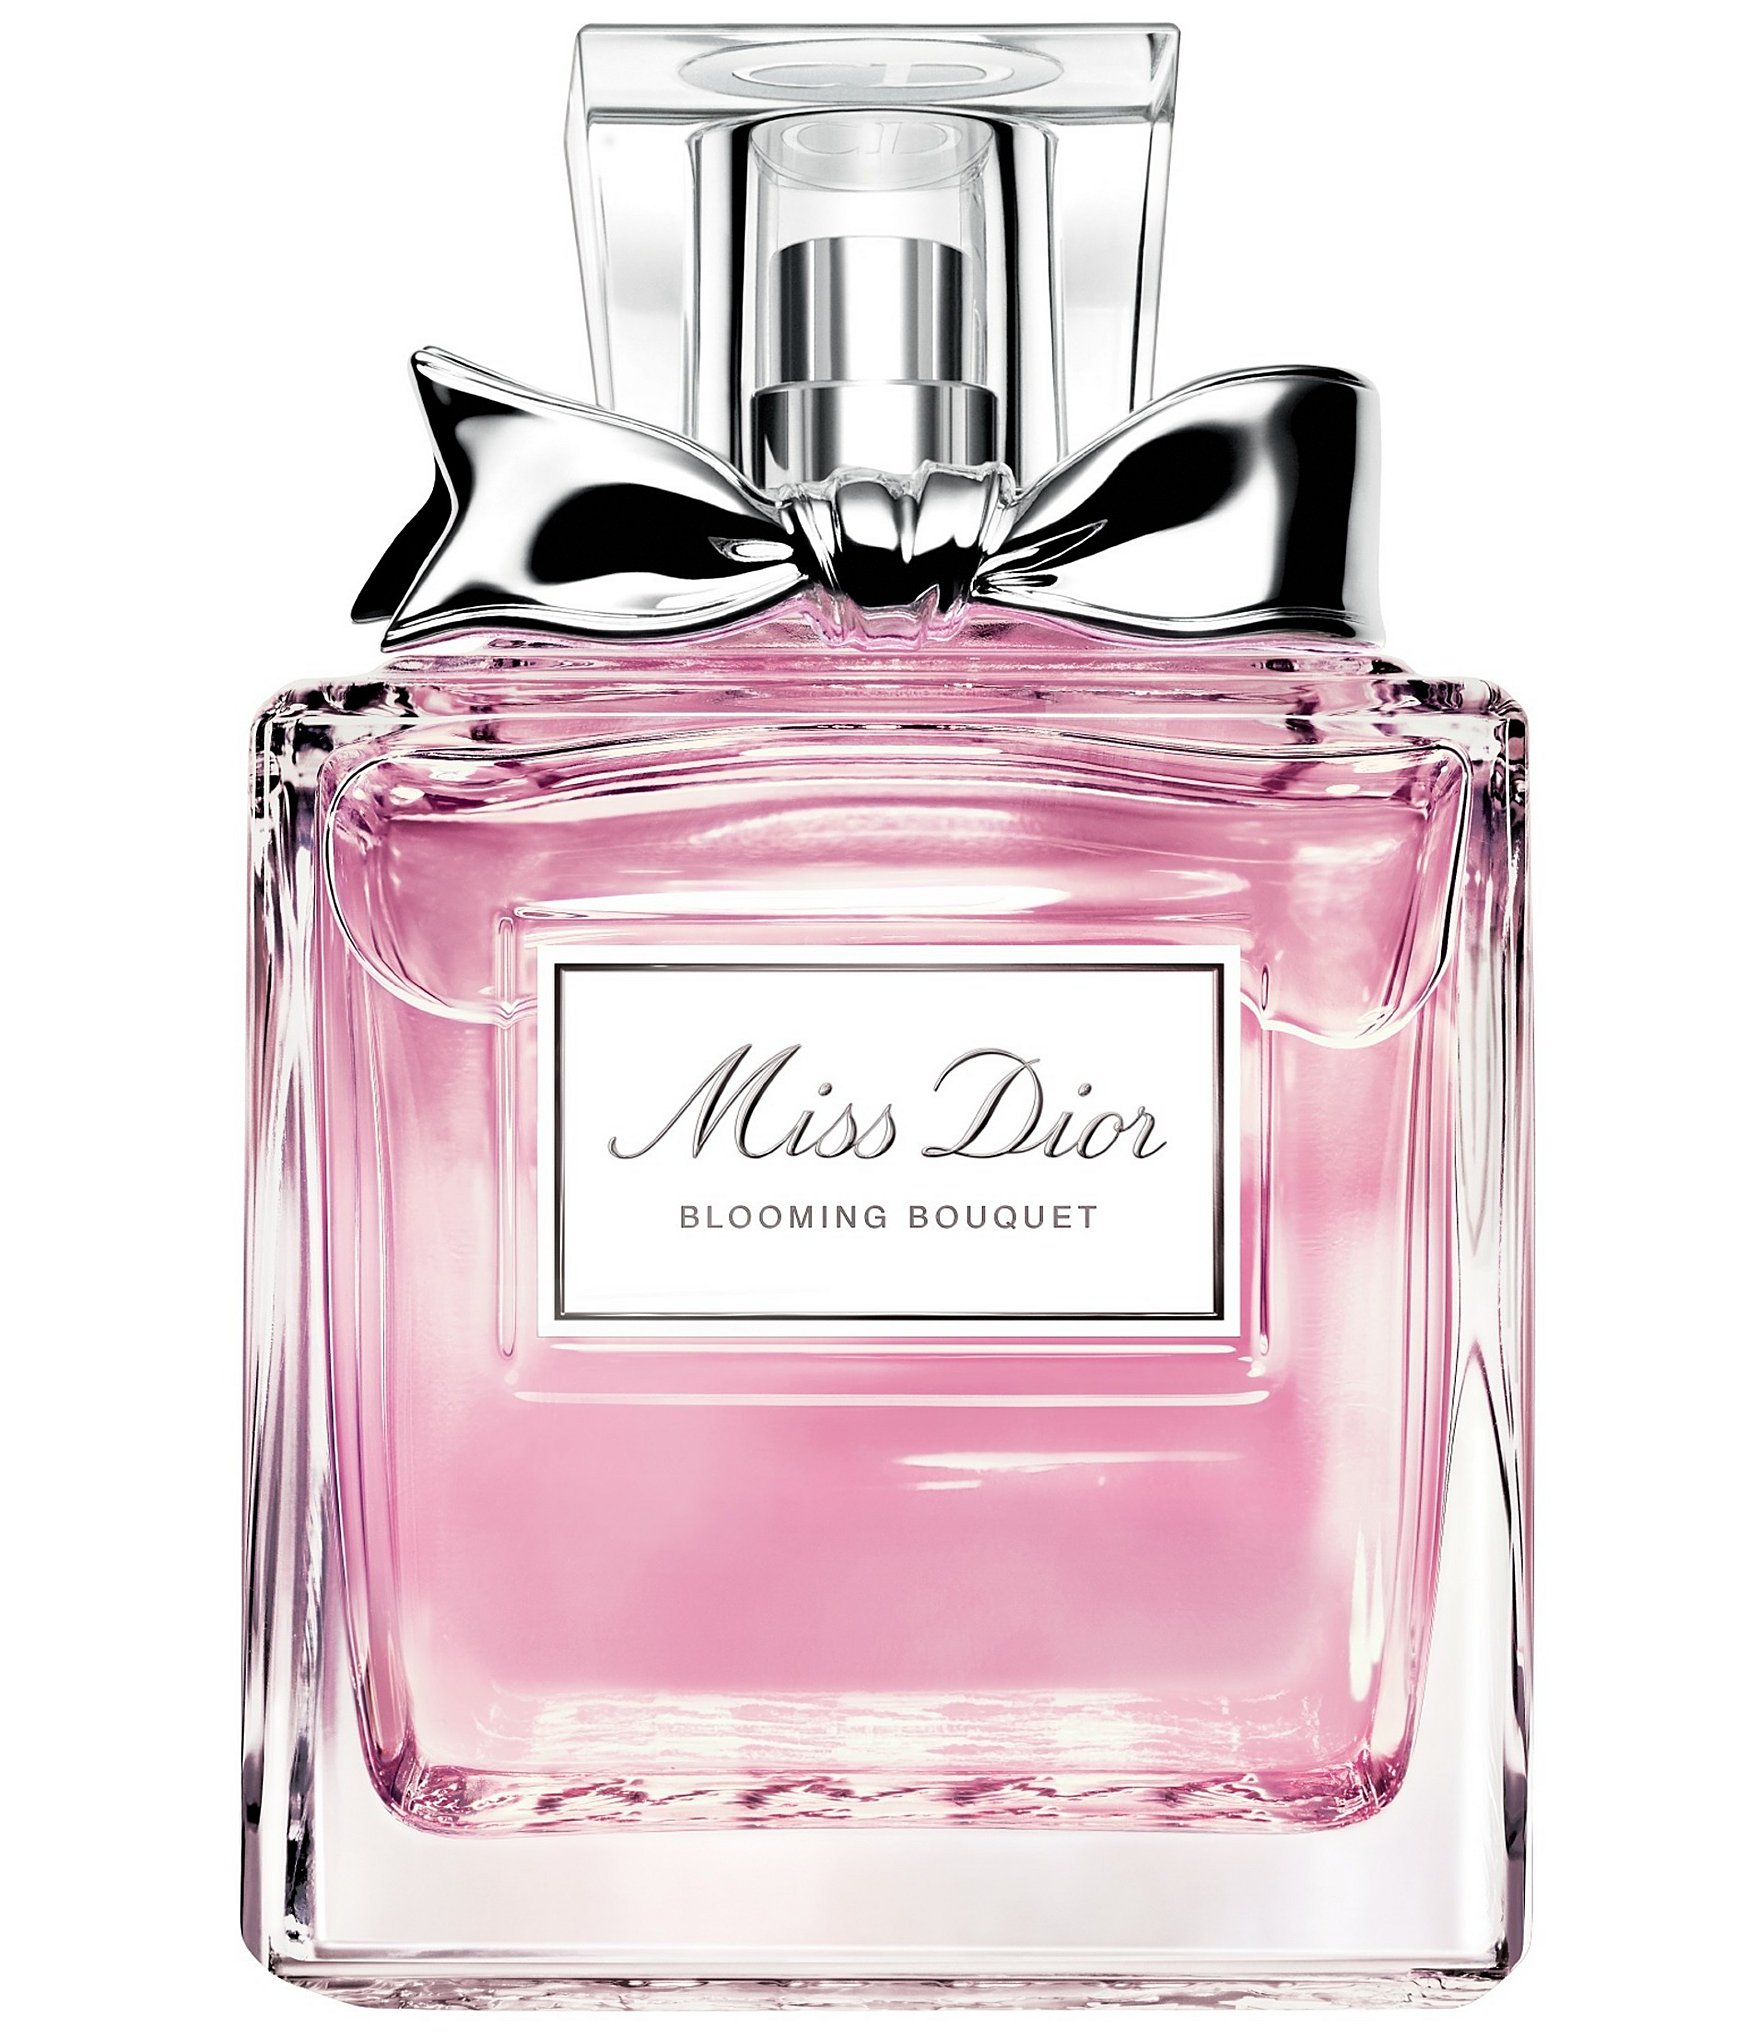 miss dior perfume offers